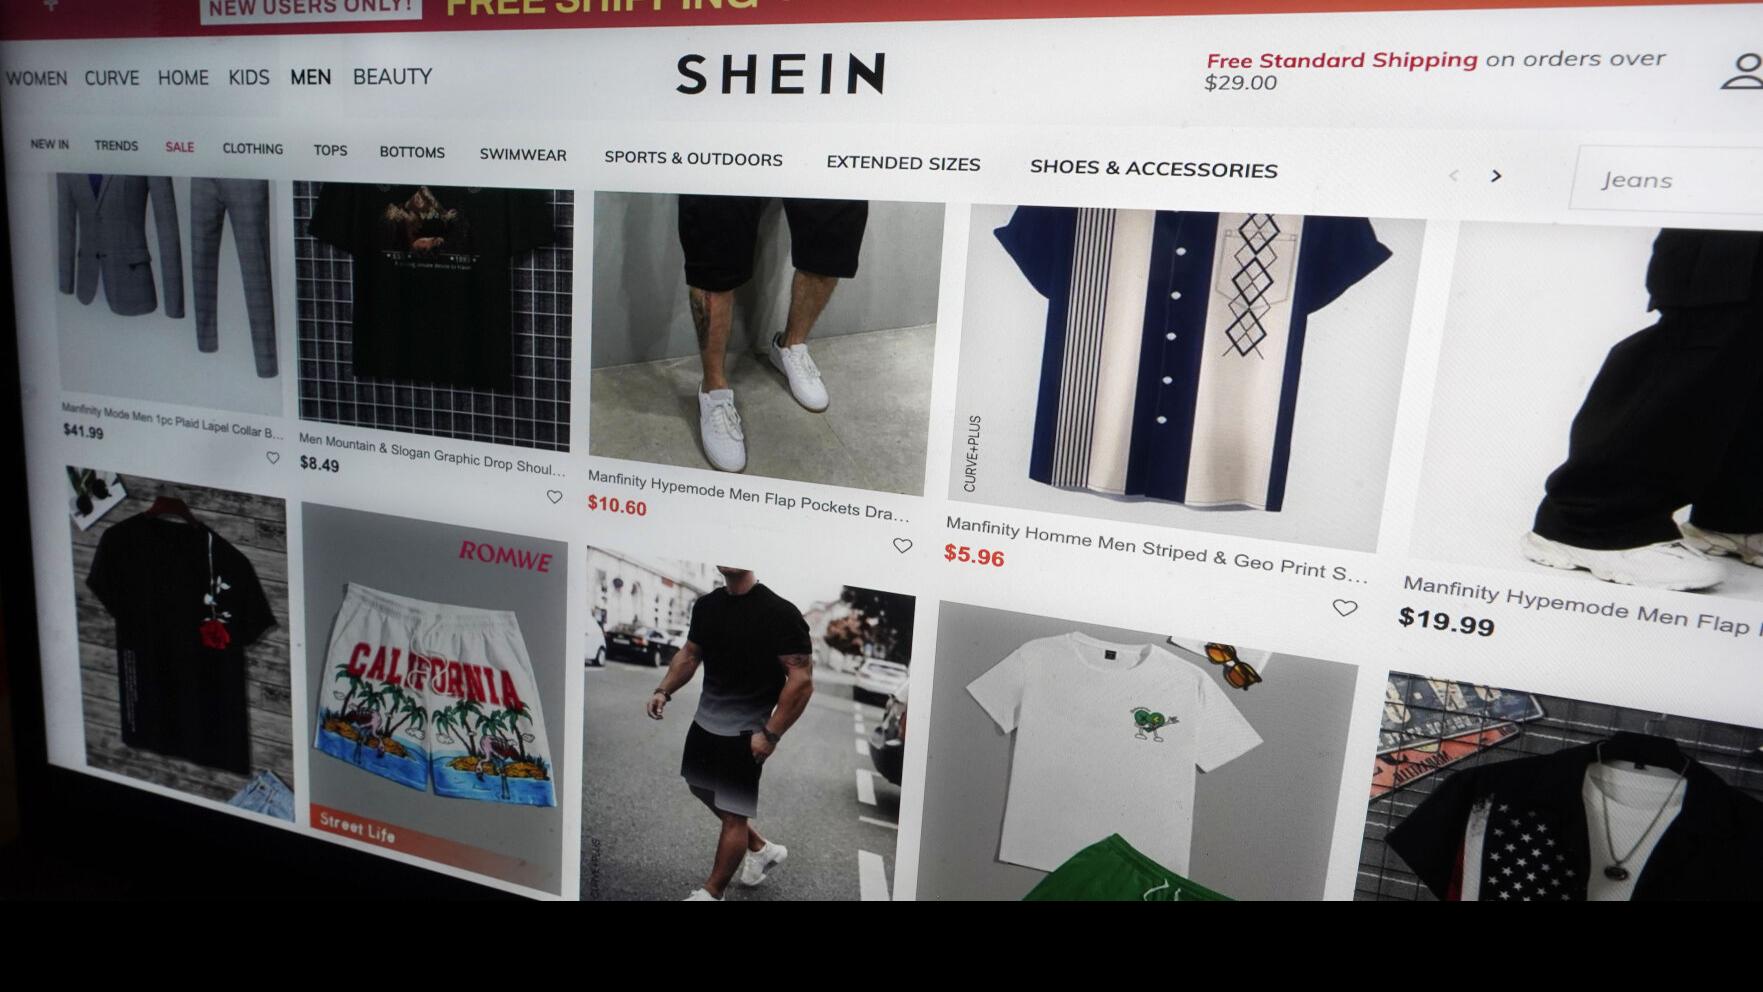 LIVEKINDLY - Shein was just named the most popular fashion